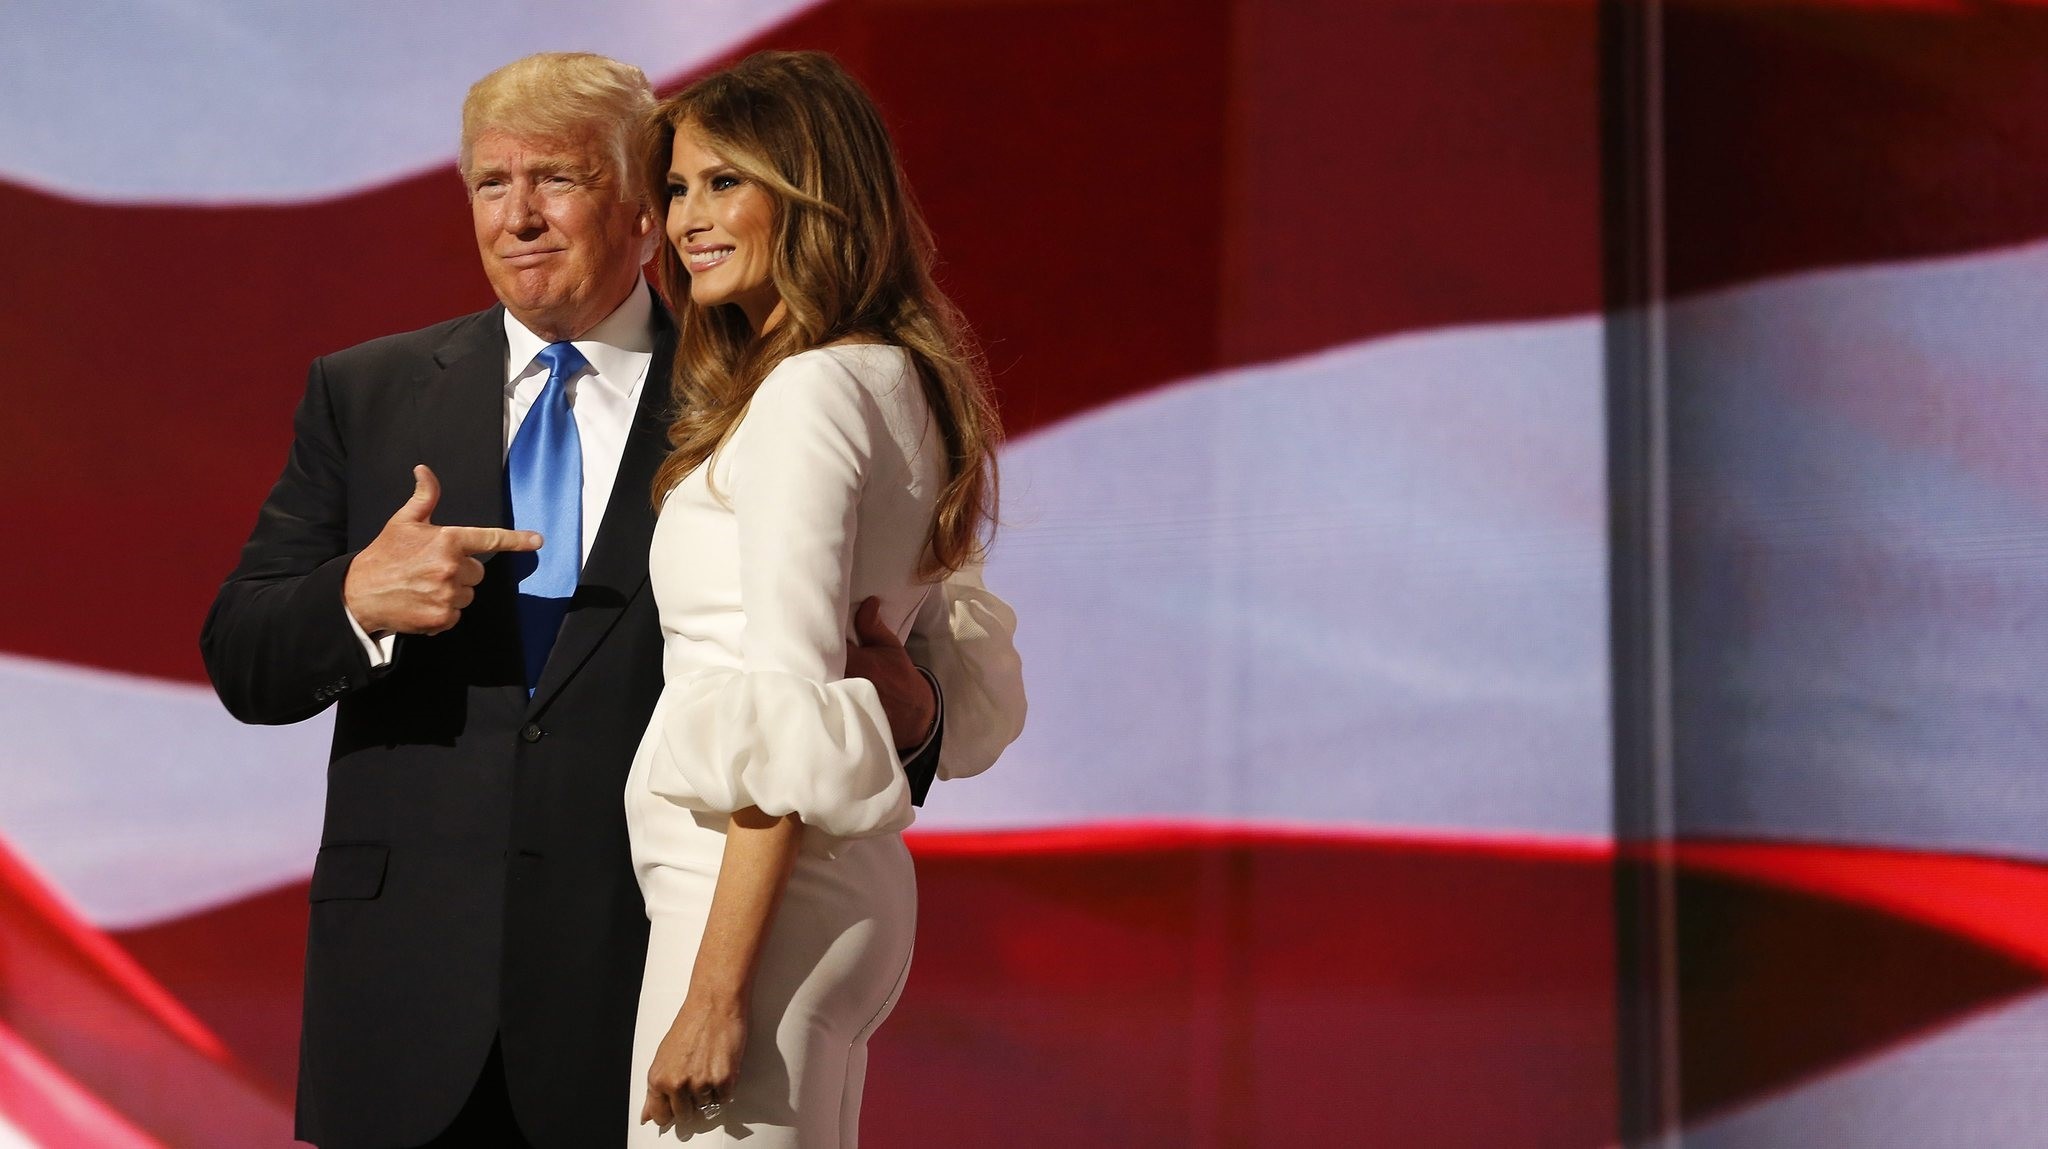 Donald Trump (L) escorts his wife Melania (R) after her speech during the second session on the first day of the 2016 Republican National Convention at Quicken Loans Arena in Cleveland, 18 July 2016. (EPA Photo)